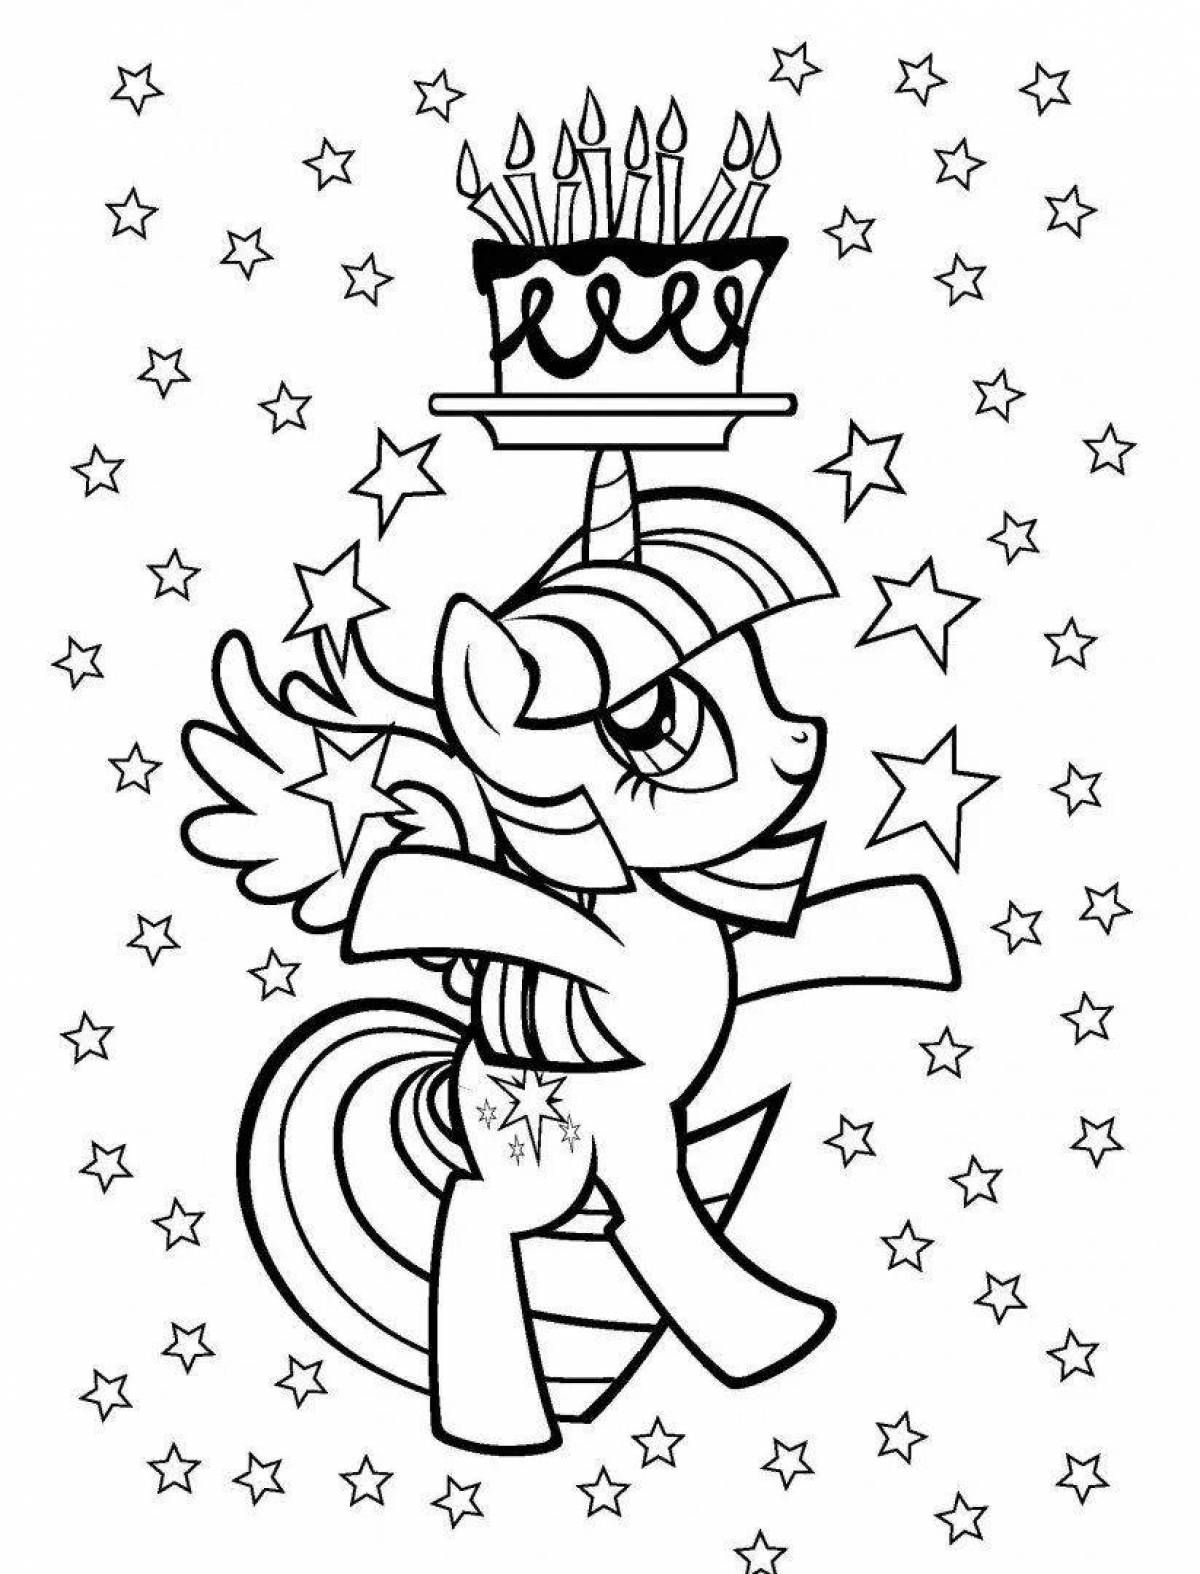 Sweet Christmas pony coloring page